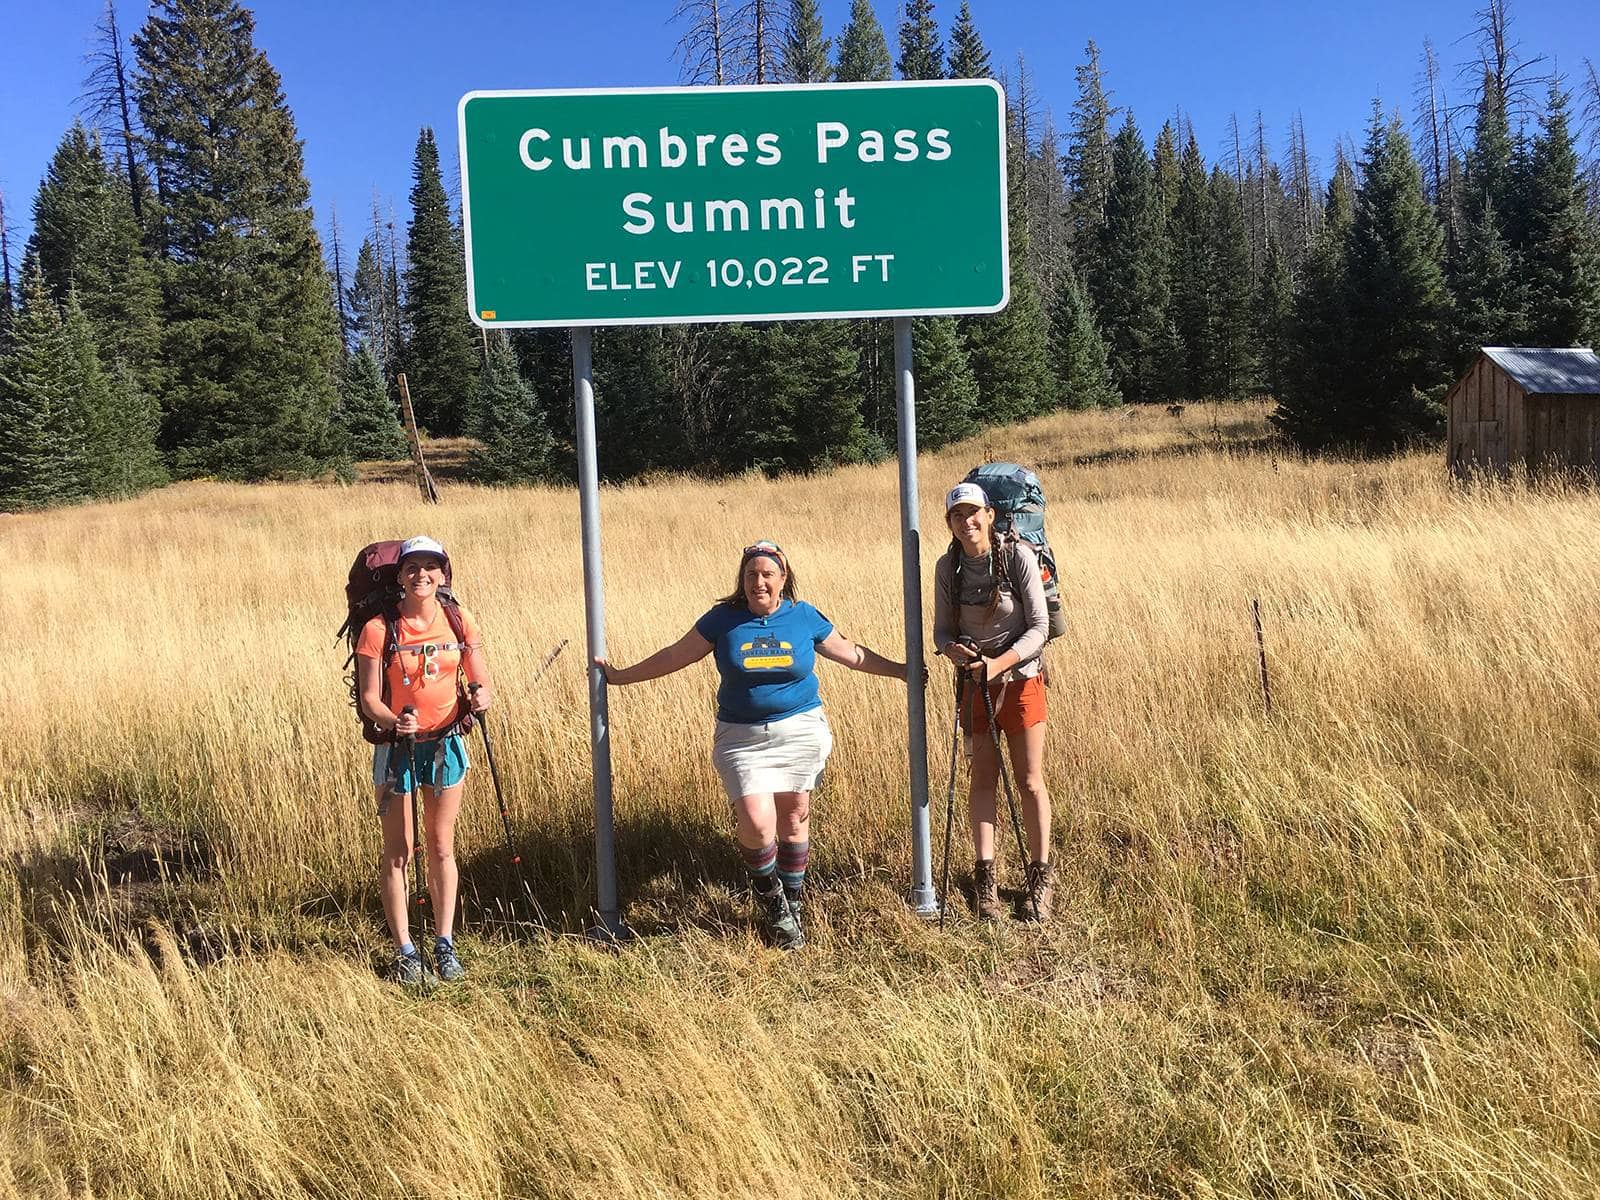 Cumbres Pass Summit sign with smiling hikers